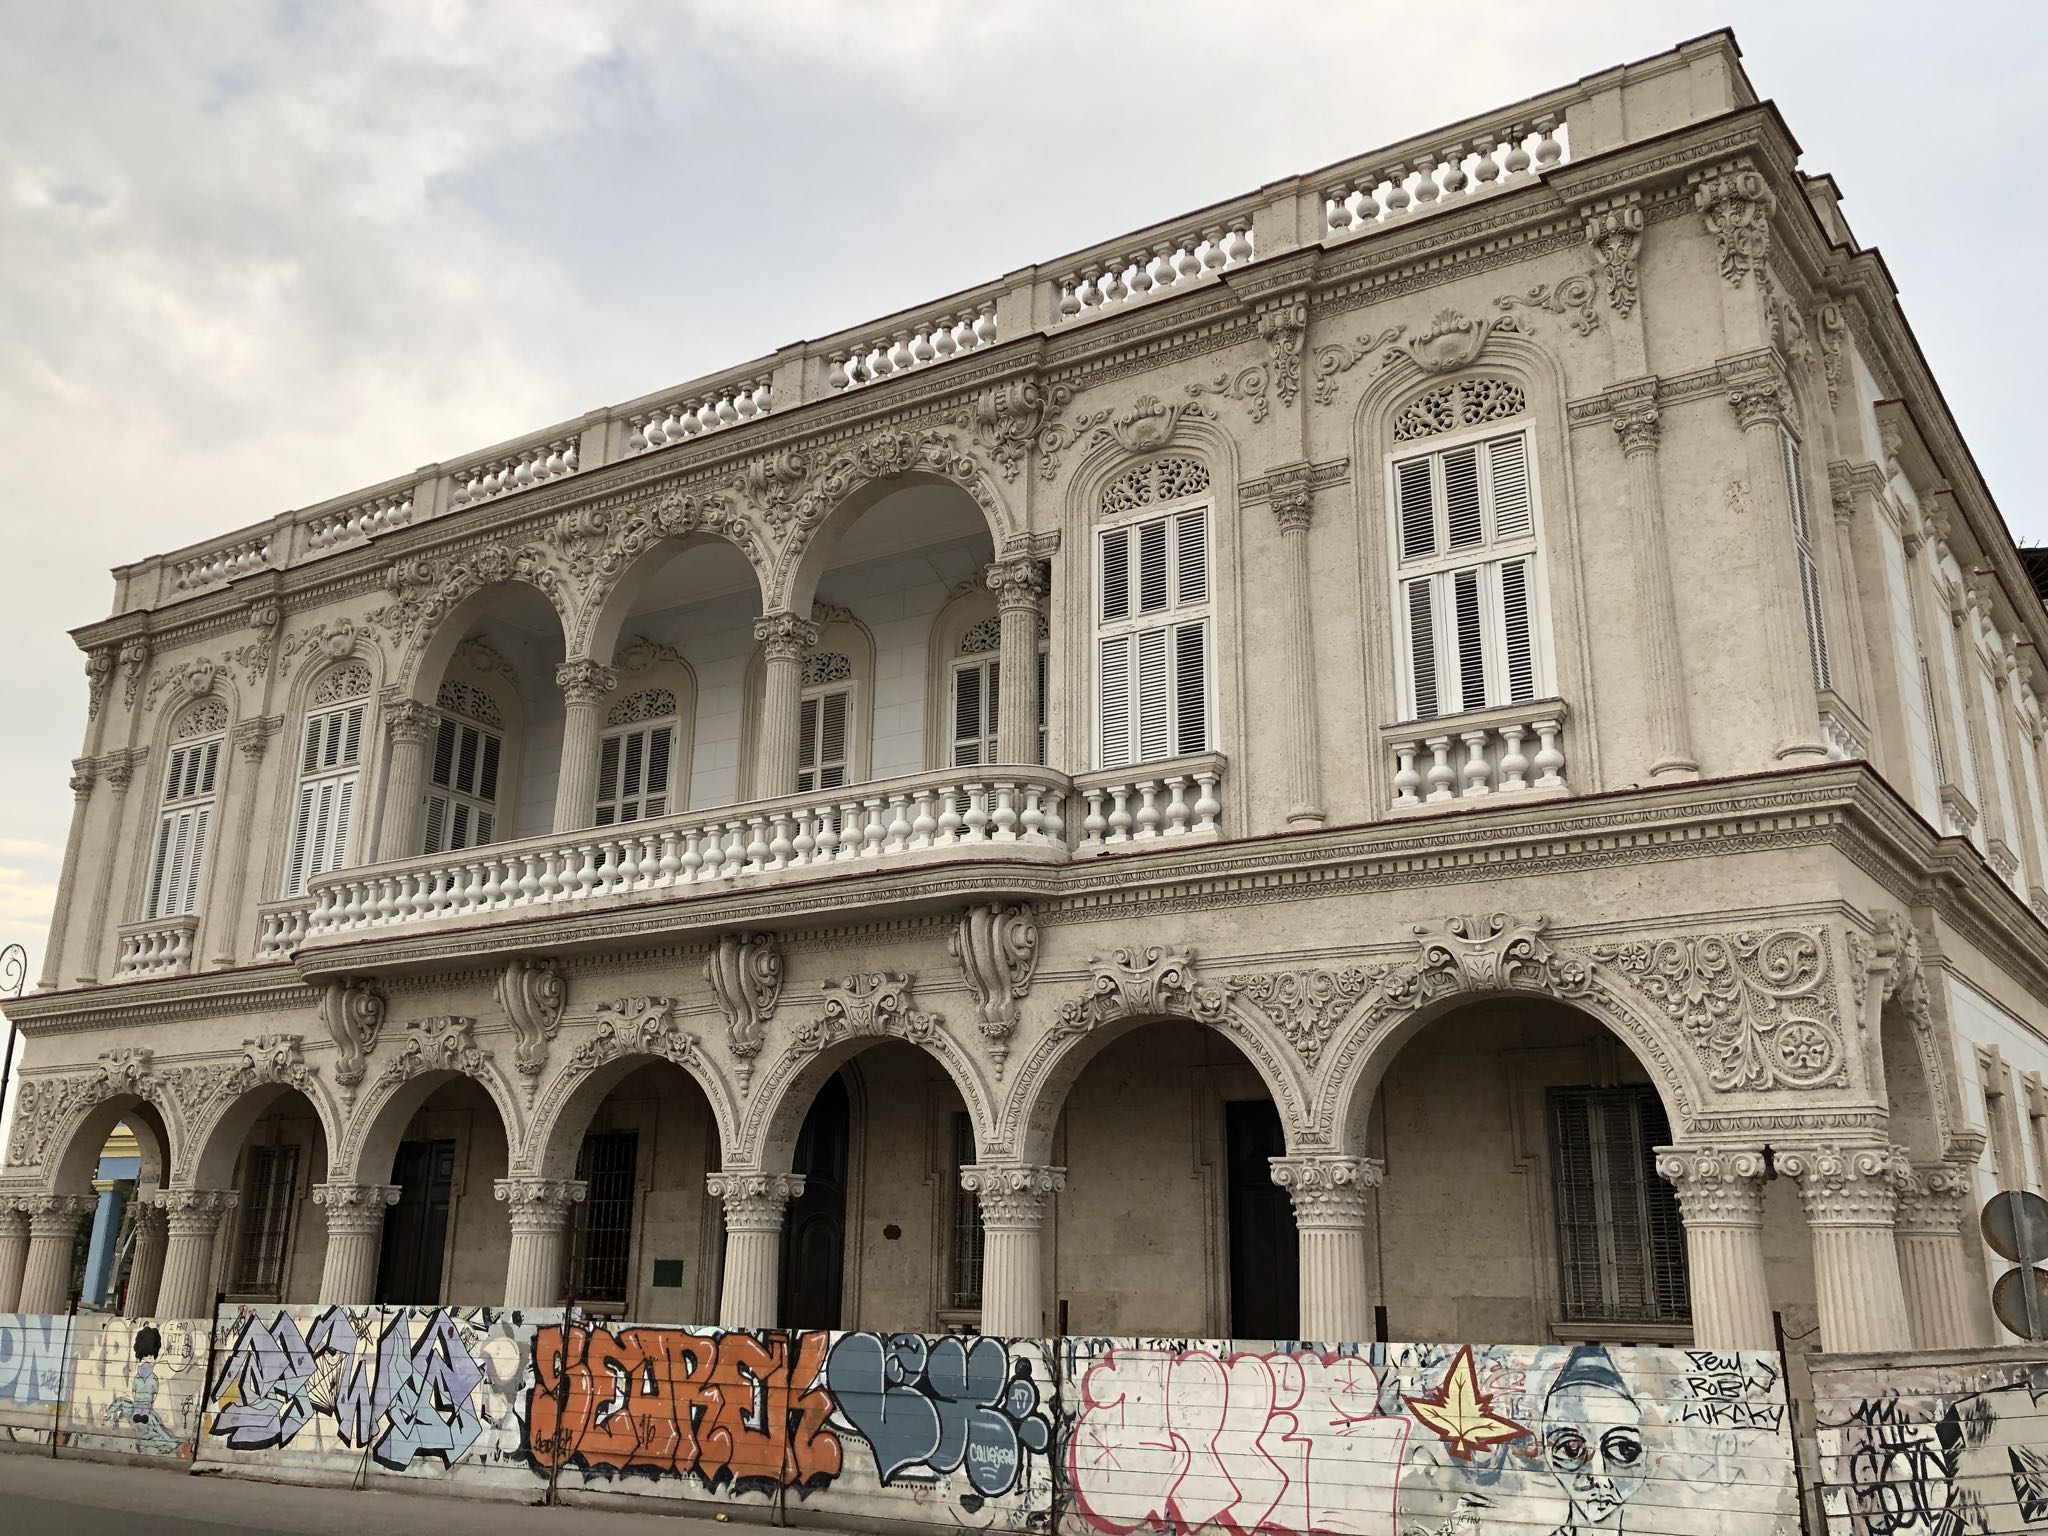 Photo 91 of 221 from the album Highlights Cuba 2019.